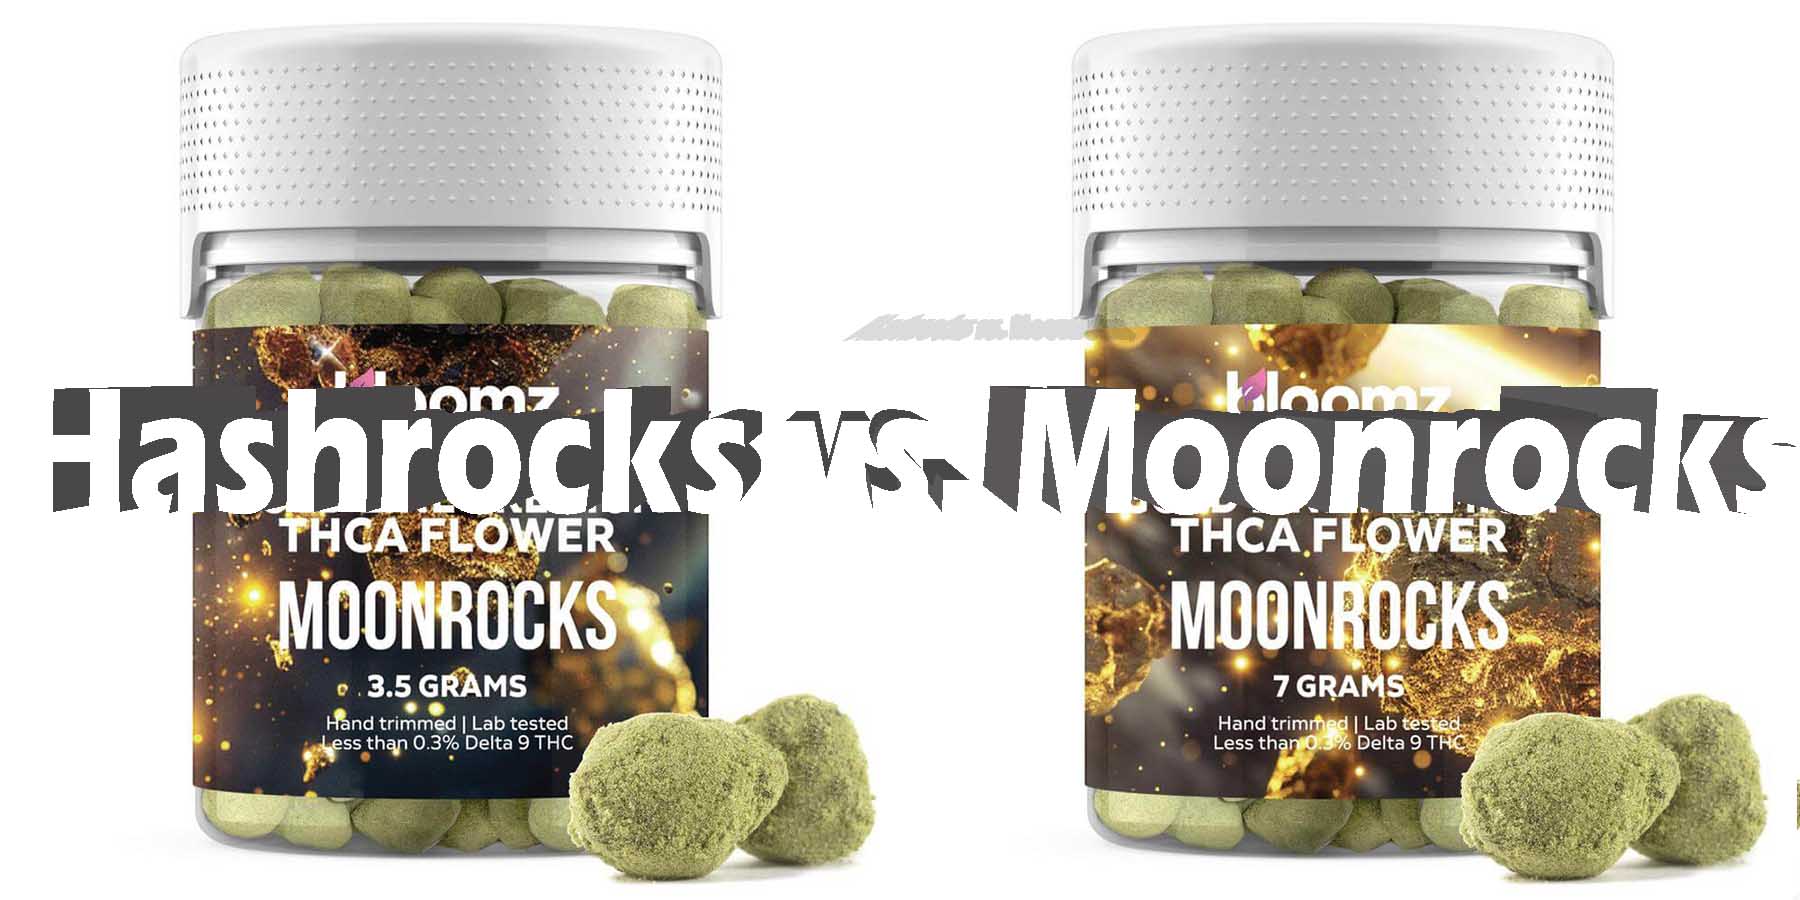 A Unique Rock Solid Flower Matchup Hashrocks vs Moonrocks Better LowestPrice Coupon Discount For Smoking Best High Smoke-Shop Online Near Me Bloomz